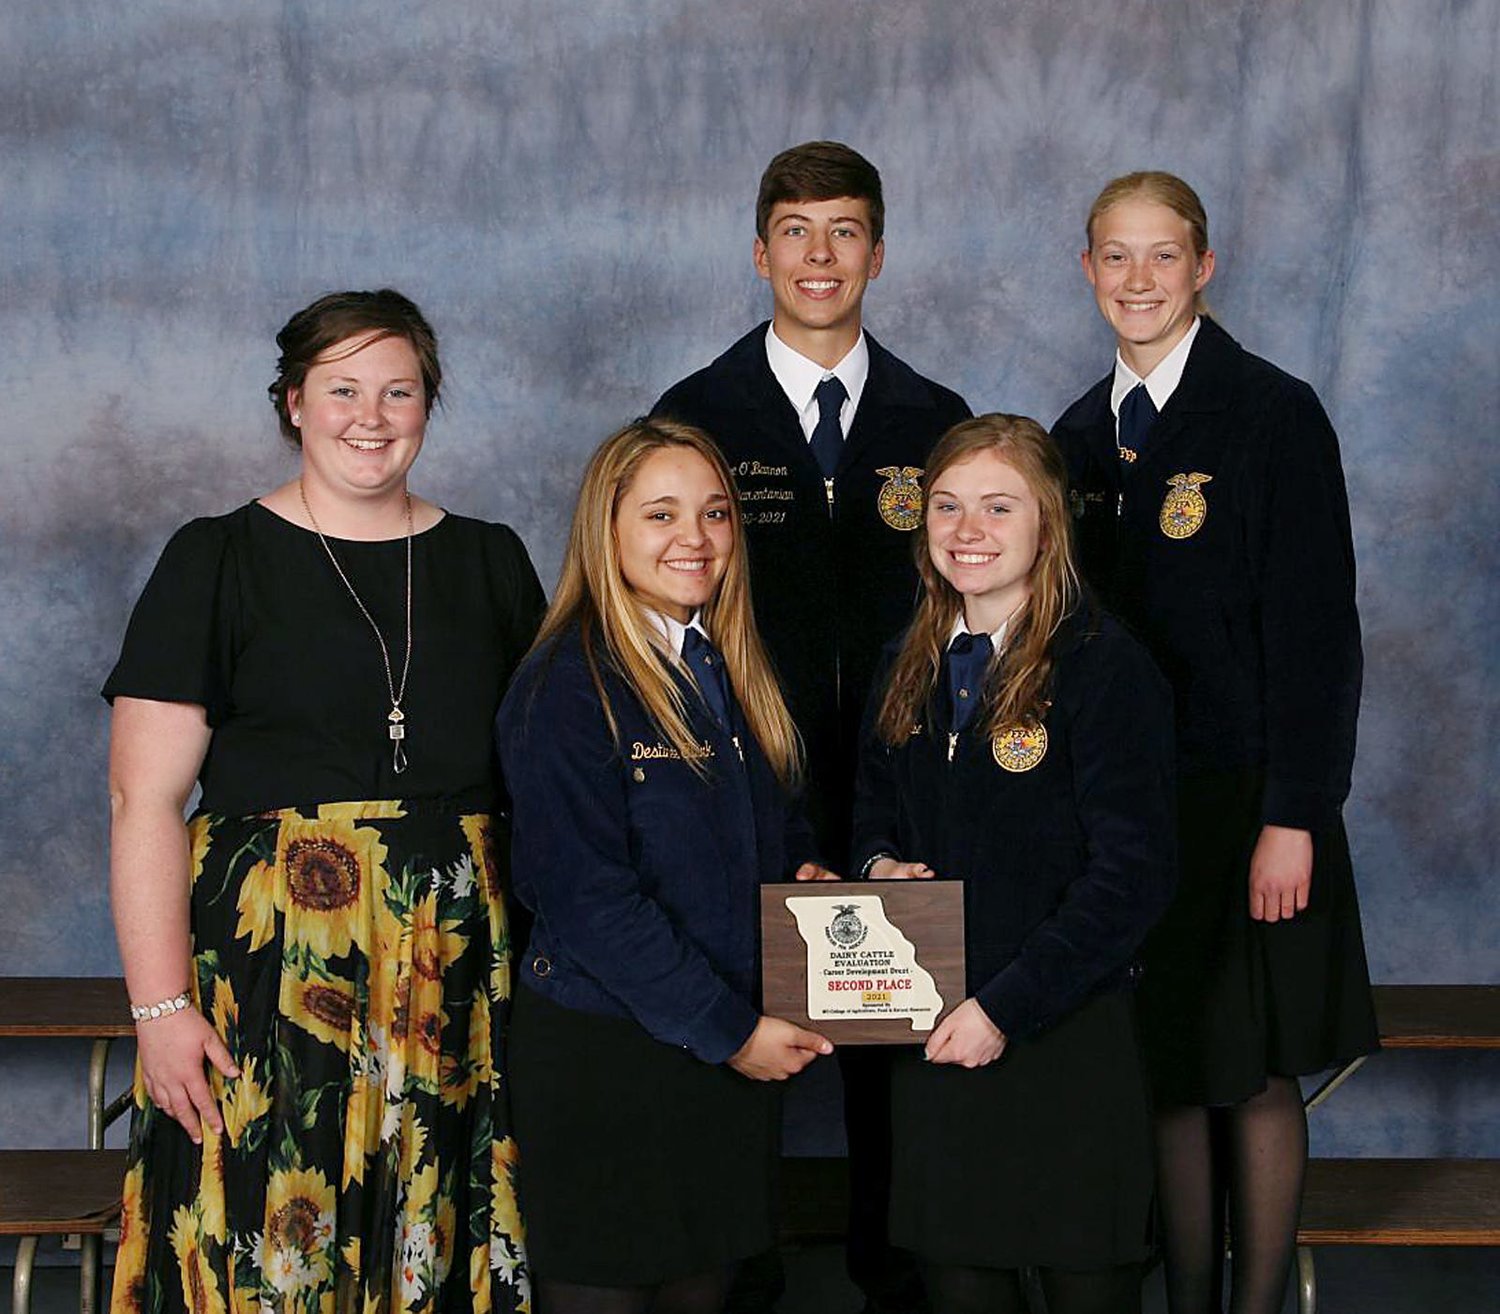 Madison High School's FFA Chapter membes consisting of (front row) teacher/advisor Katie Wantland, and students Peyton Hook, Mallory Greiwe,  and (second row) Joe O'Bannon and Hunter Stockhorst, placed second in the dairy cattle evaluation and management career development category at the 2021 Missouri FFA State Convention held April 30 – May 1 in Sedalia.